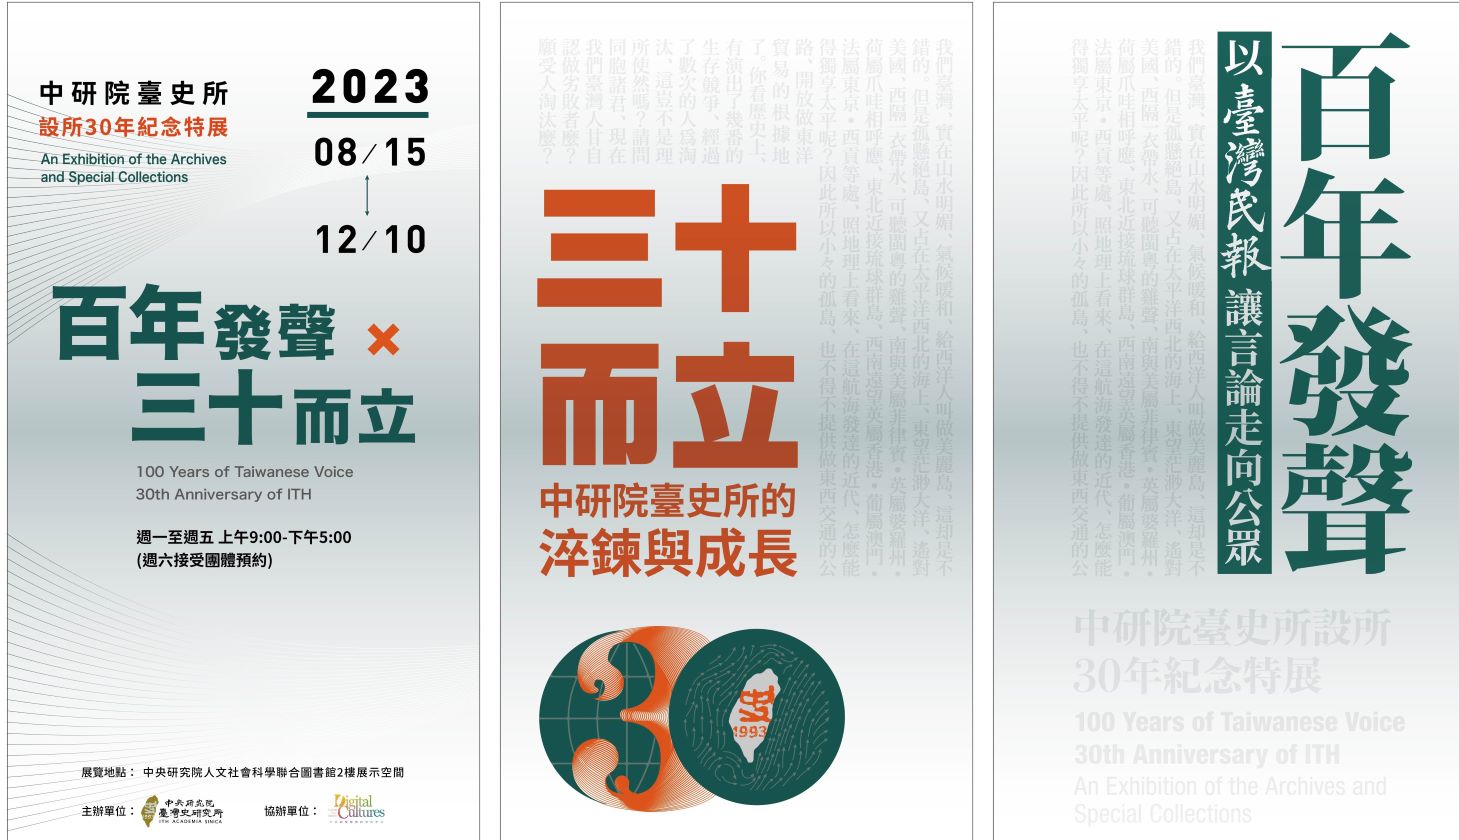 100 Years of Taiwanese Voice & 30th Anniversary of ITH